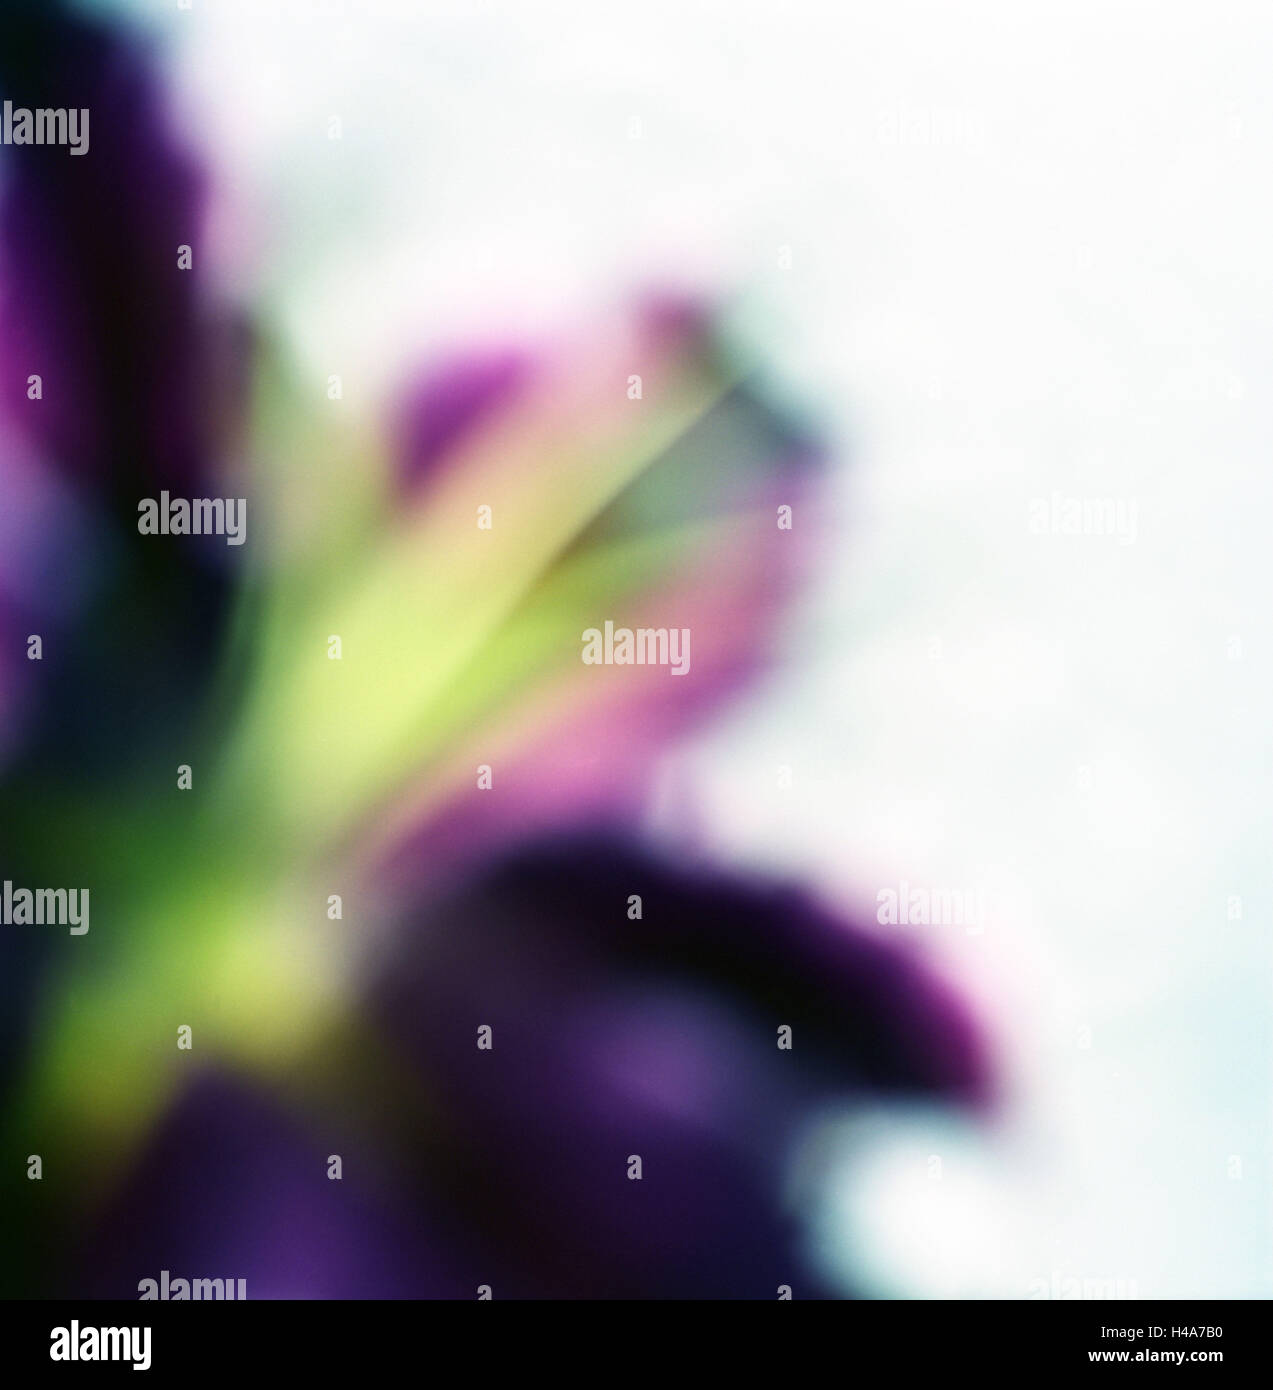 Abstraction, lily, blur, Stock Photo